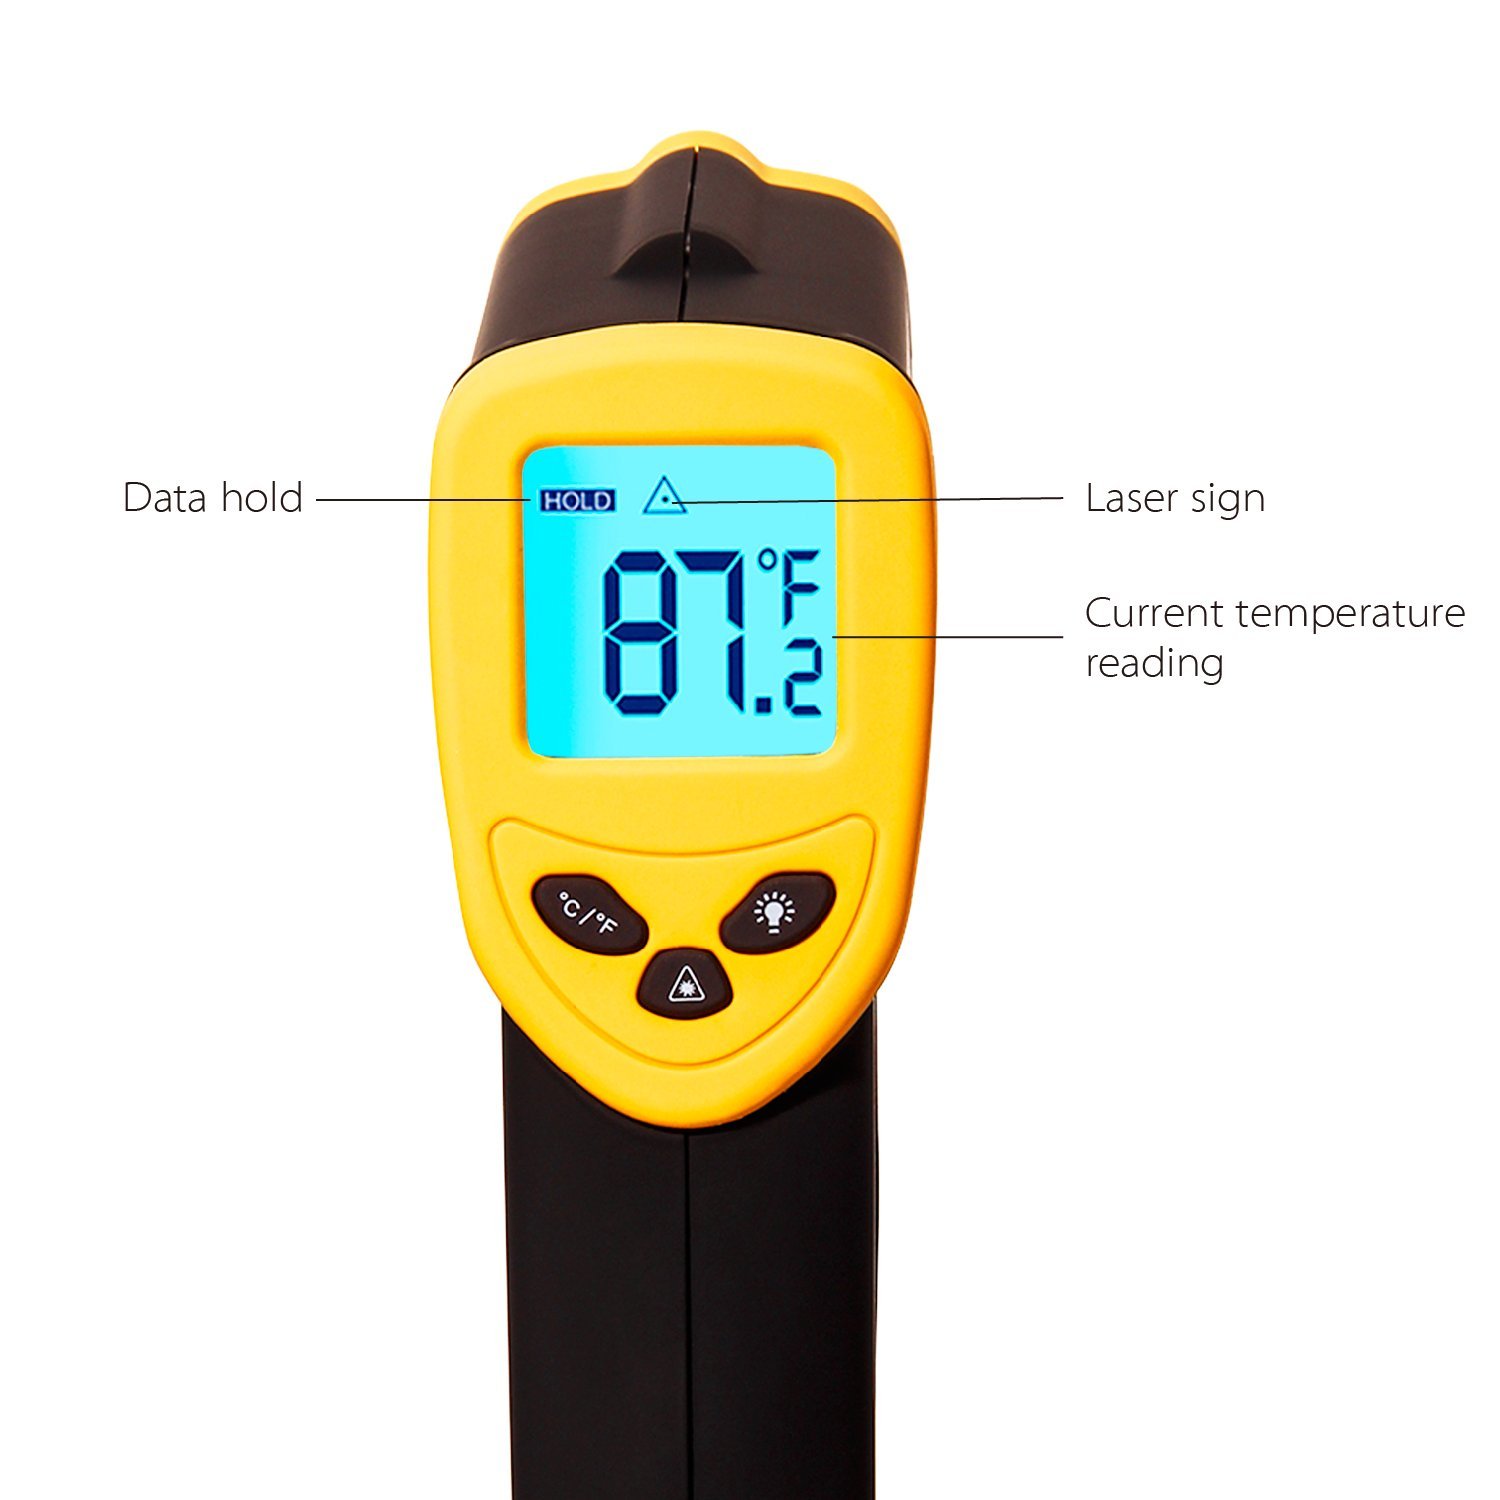 https://buytechzone.com/wp-content/uploads/imported/Etekcity-Lasergrip-1080-ETC-8550-Temperature-Gun-Non-contact-Digital-Laser-Infrared-IR-Thermometer-58-1022F-121-DS-Instant-read-FDAFCCCEROHS-Approved-B00DMI632G-2.jpg